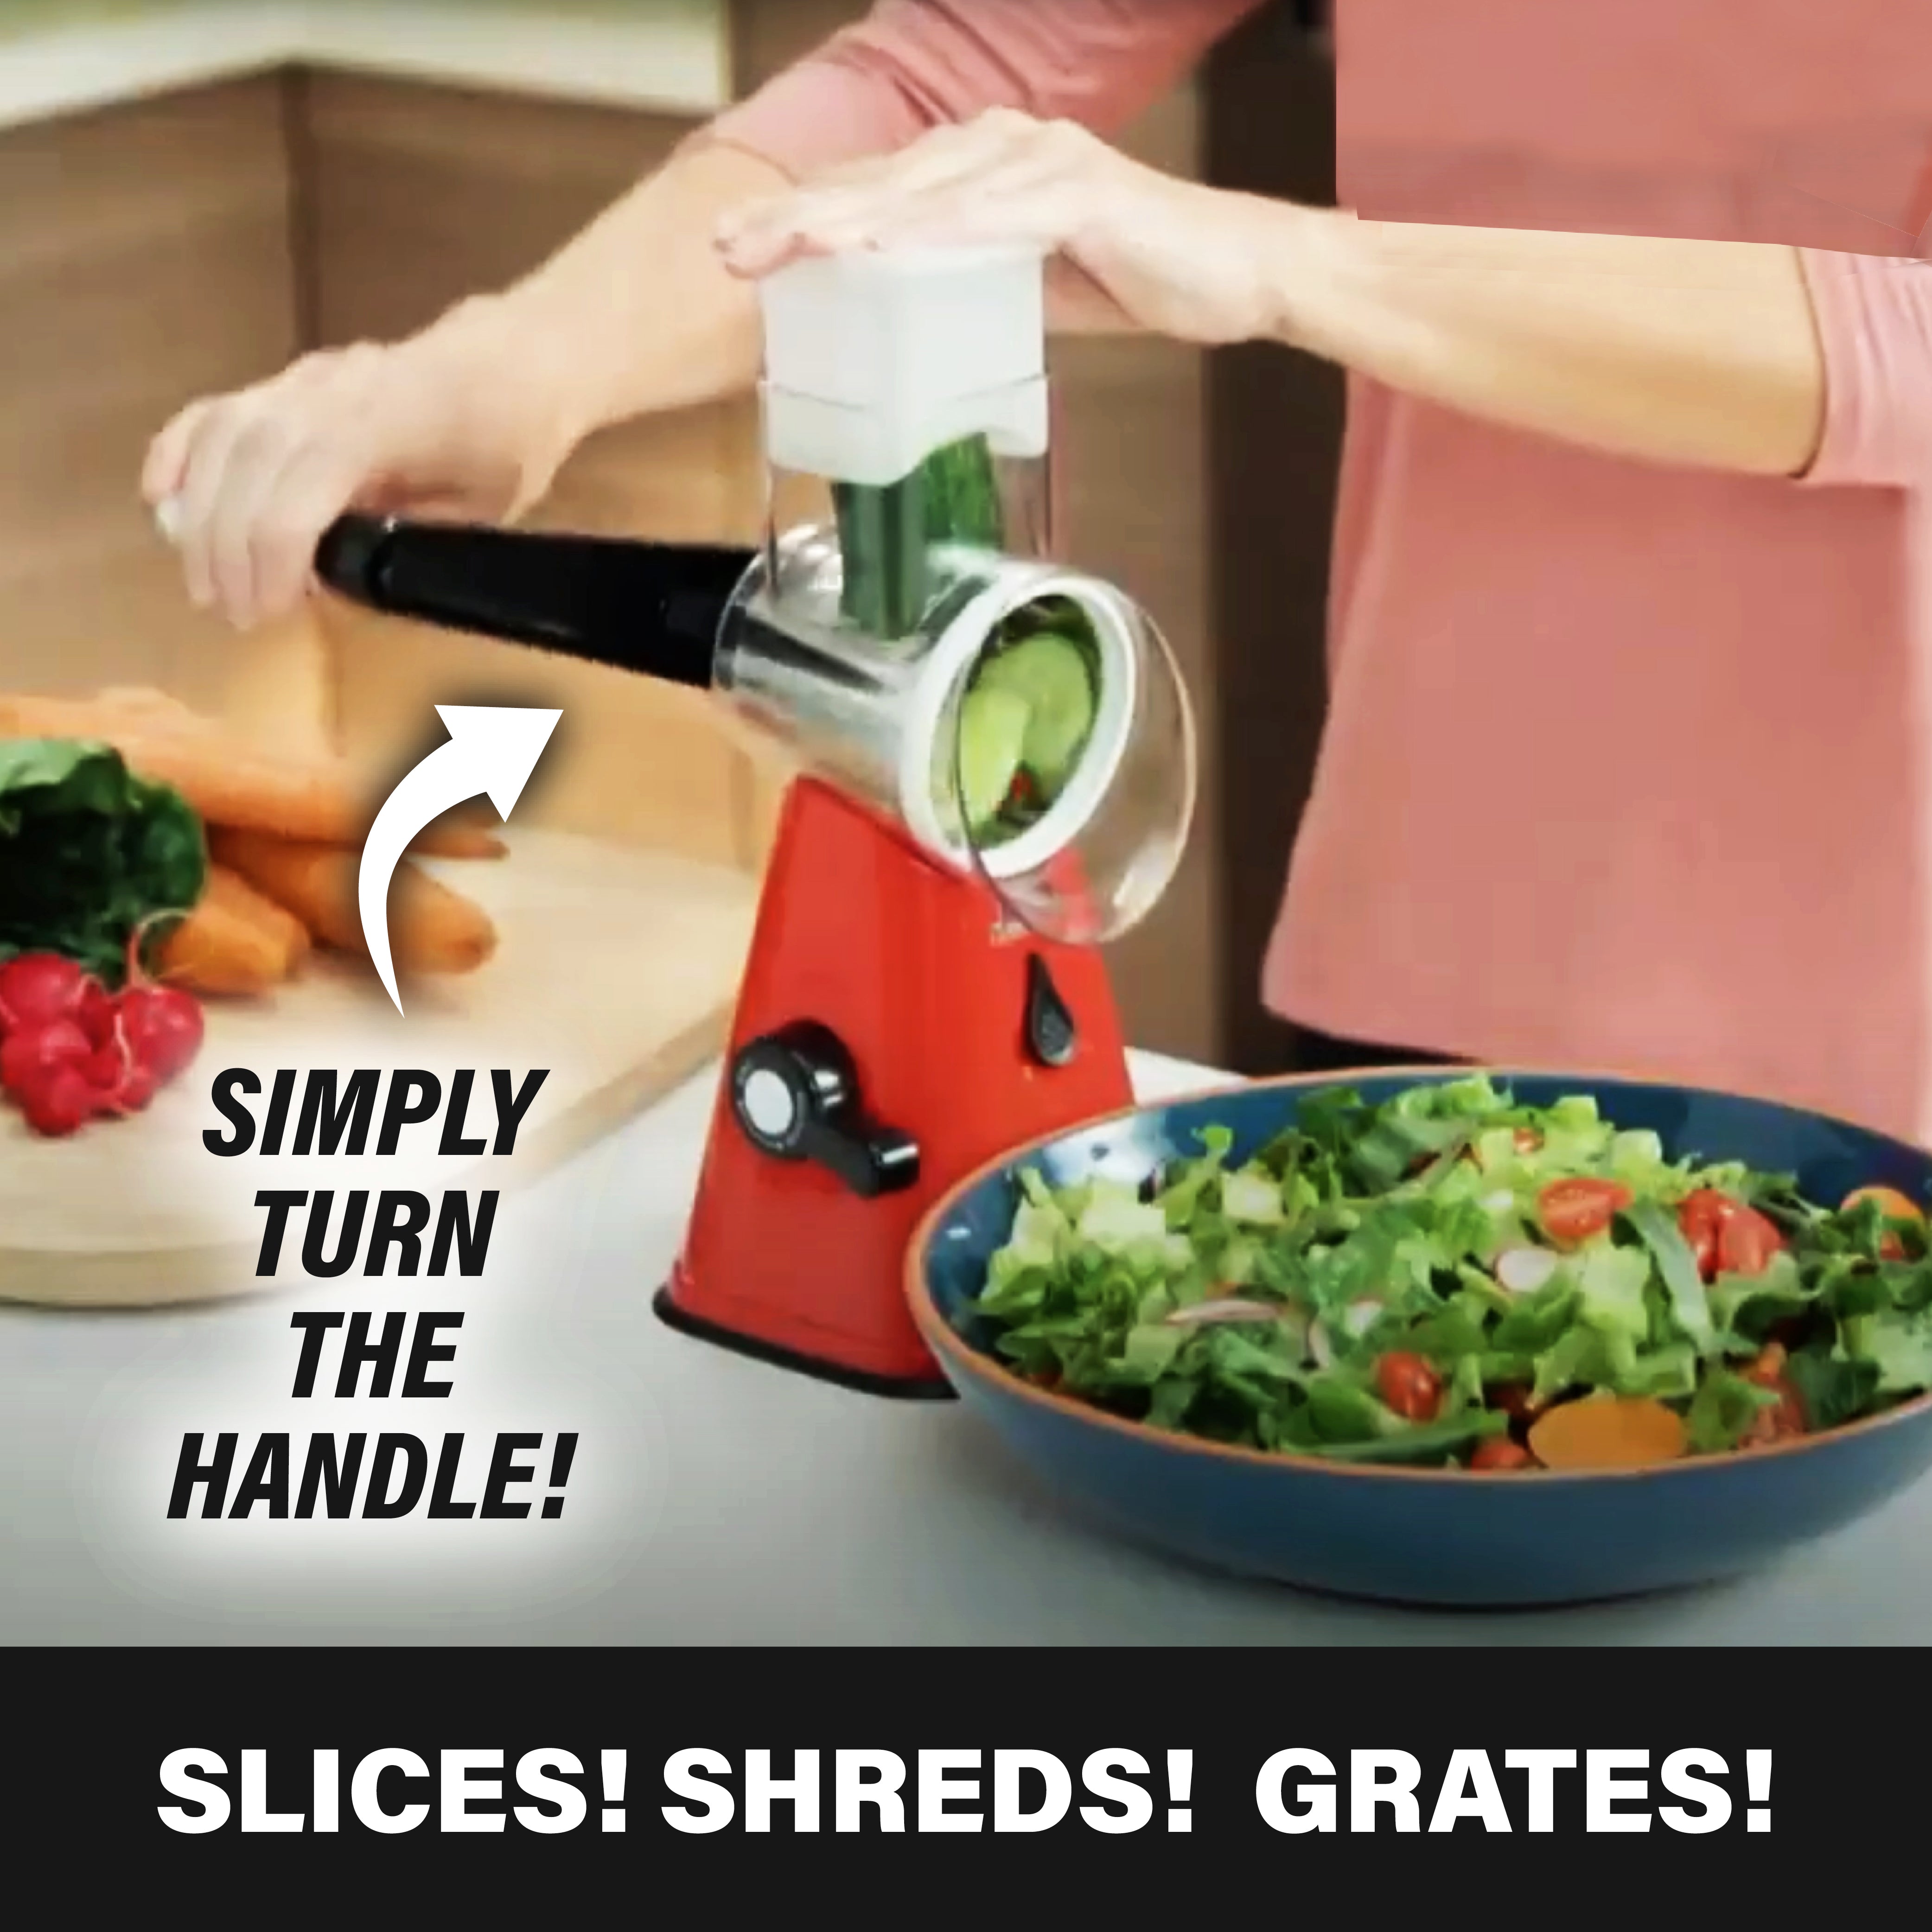 NutriSlicer 3-in-1 Spinning/Rotating Mandoline and Countertop Food